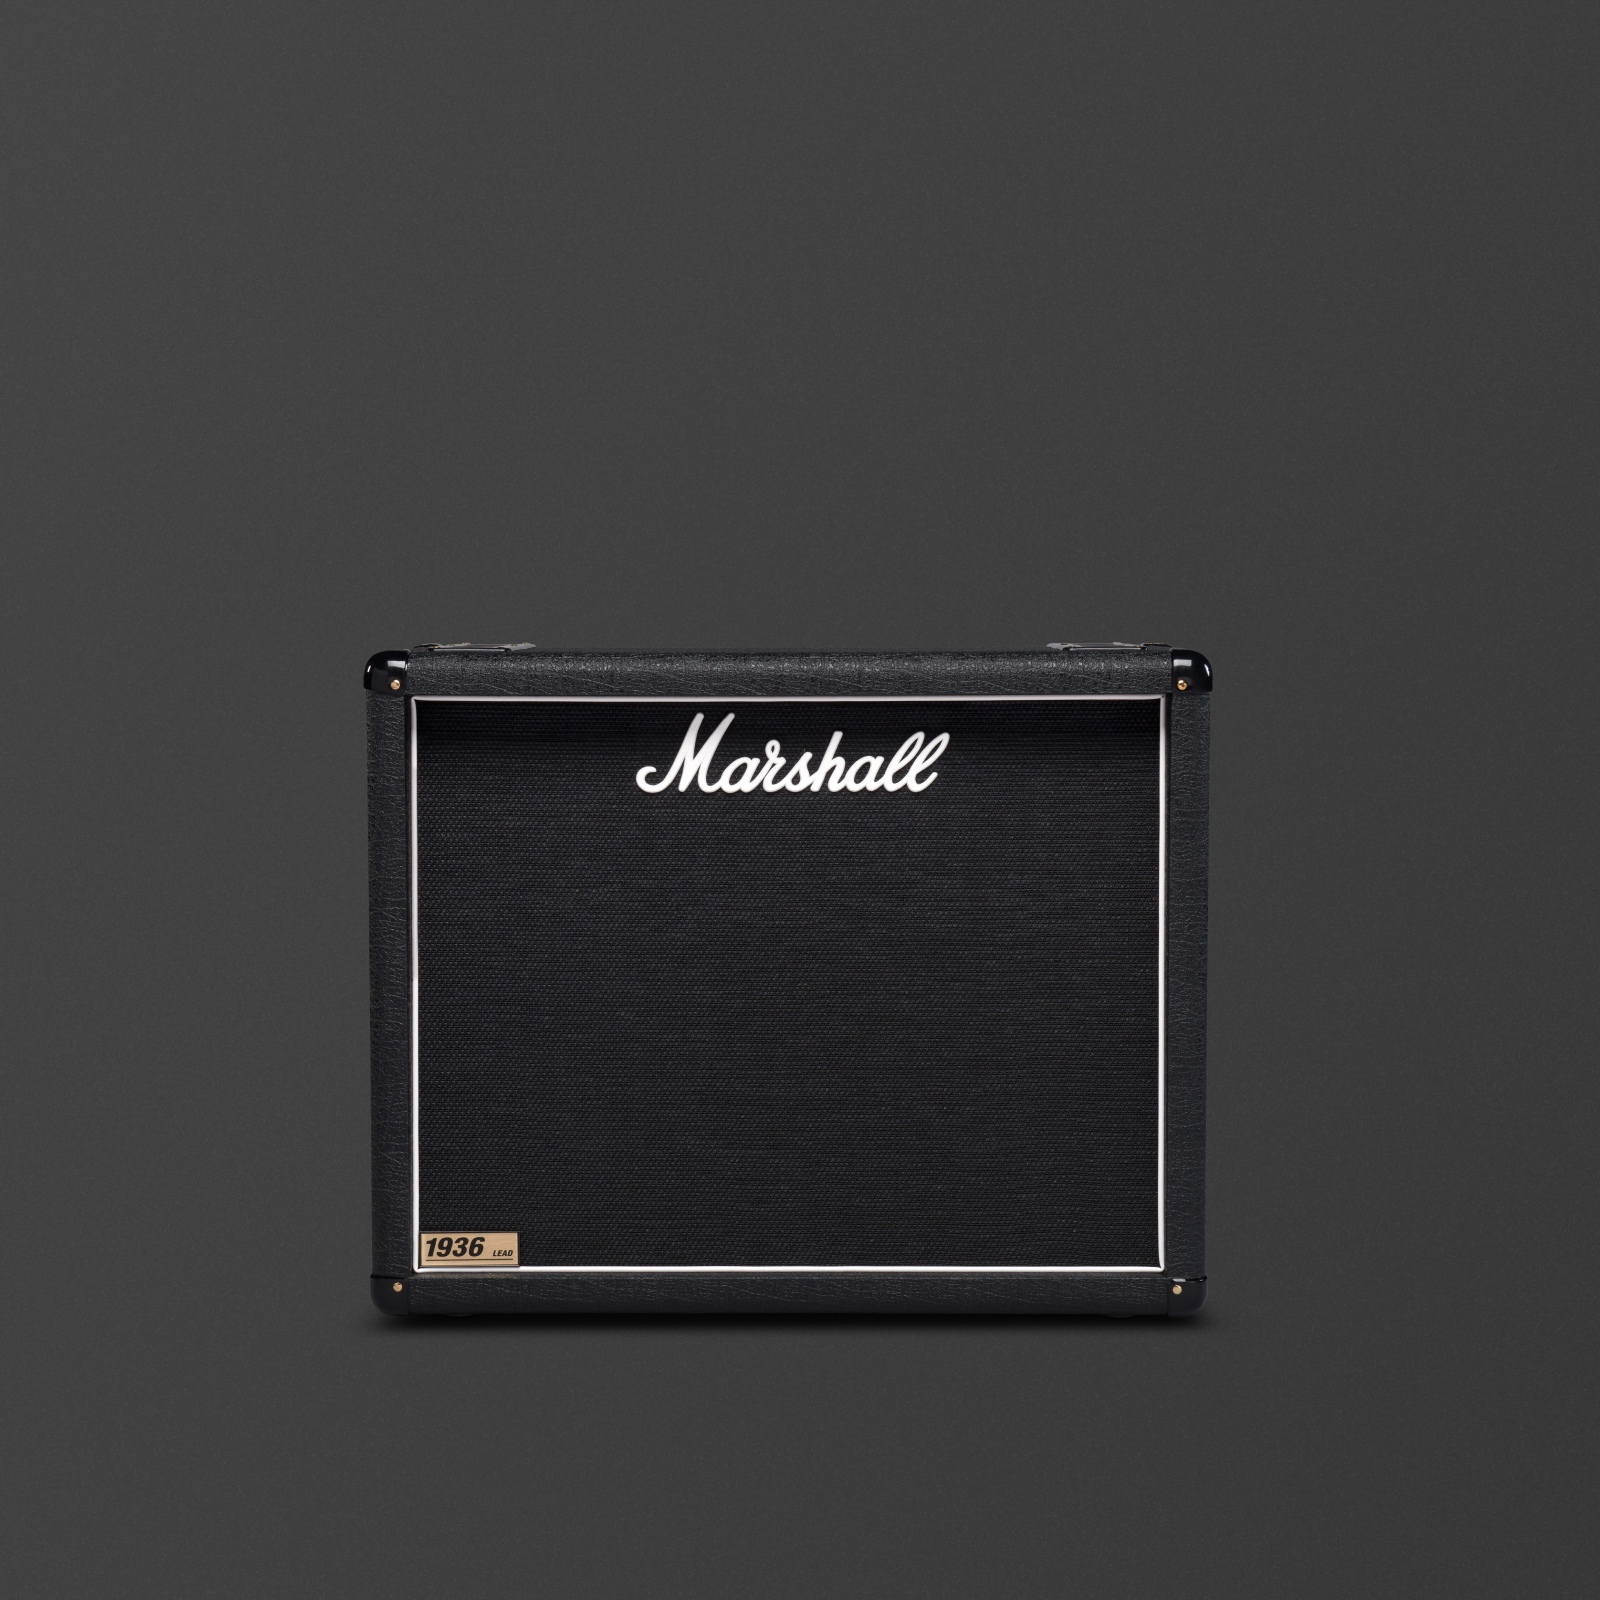 Black compact 2x12" cabinet